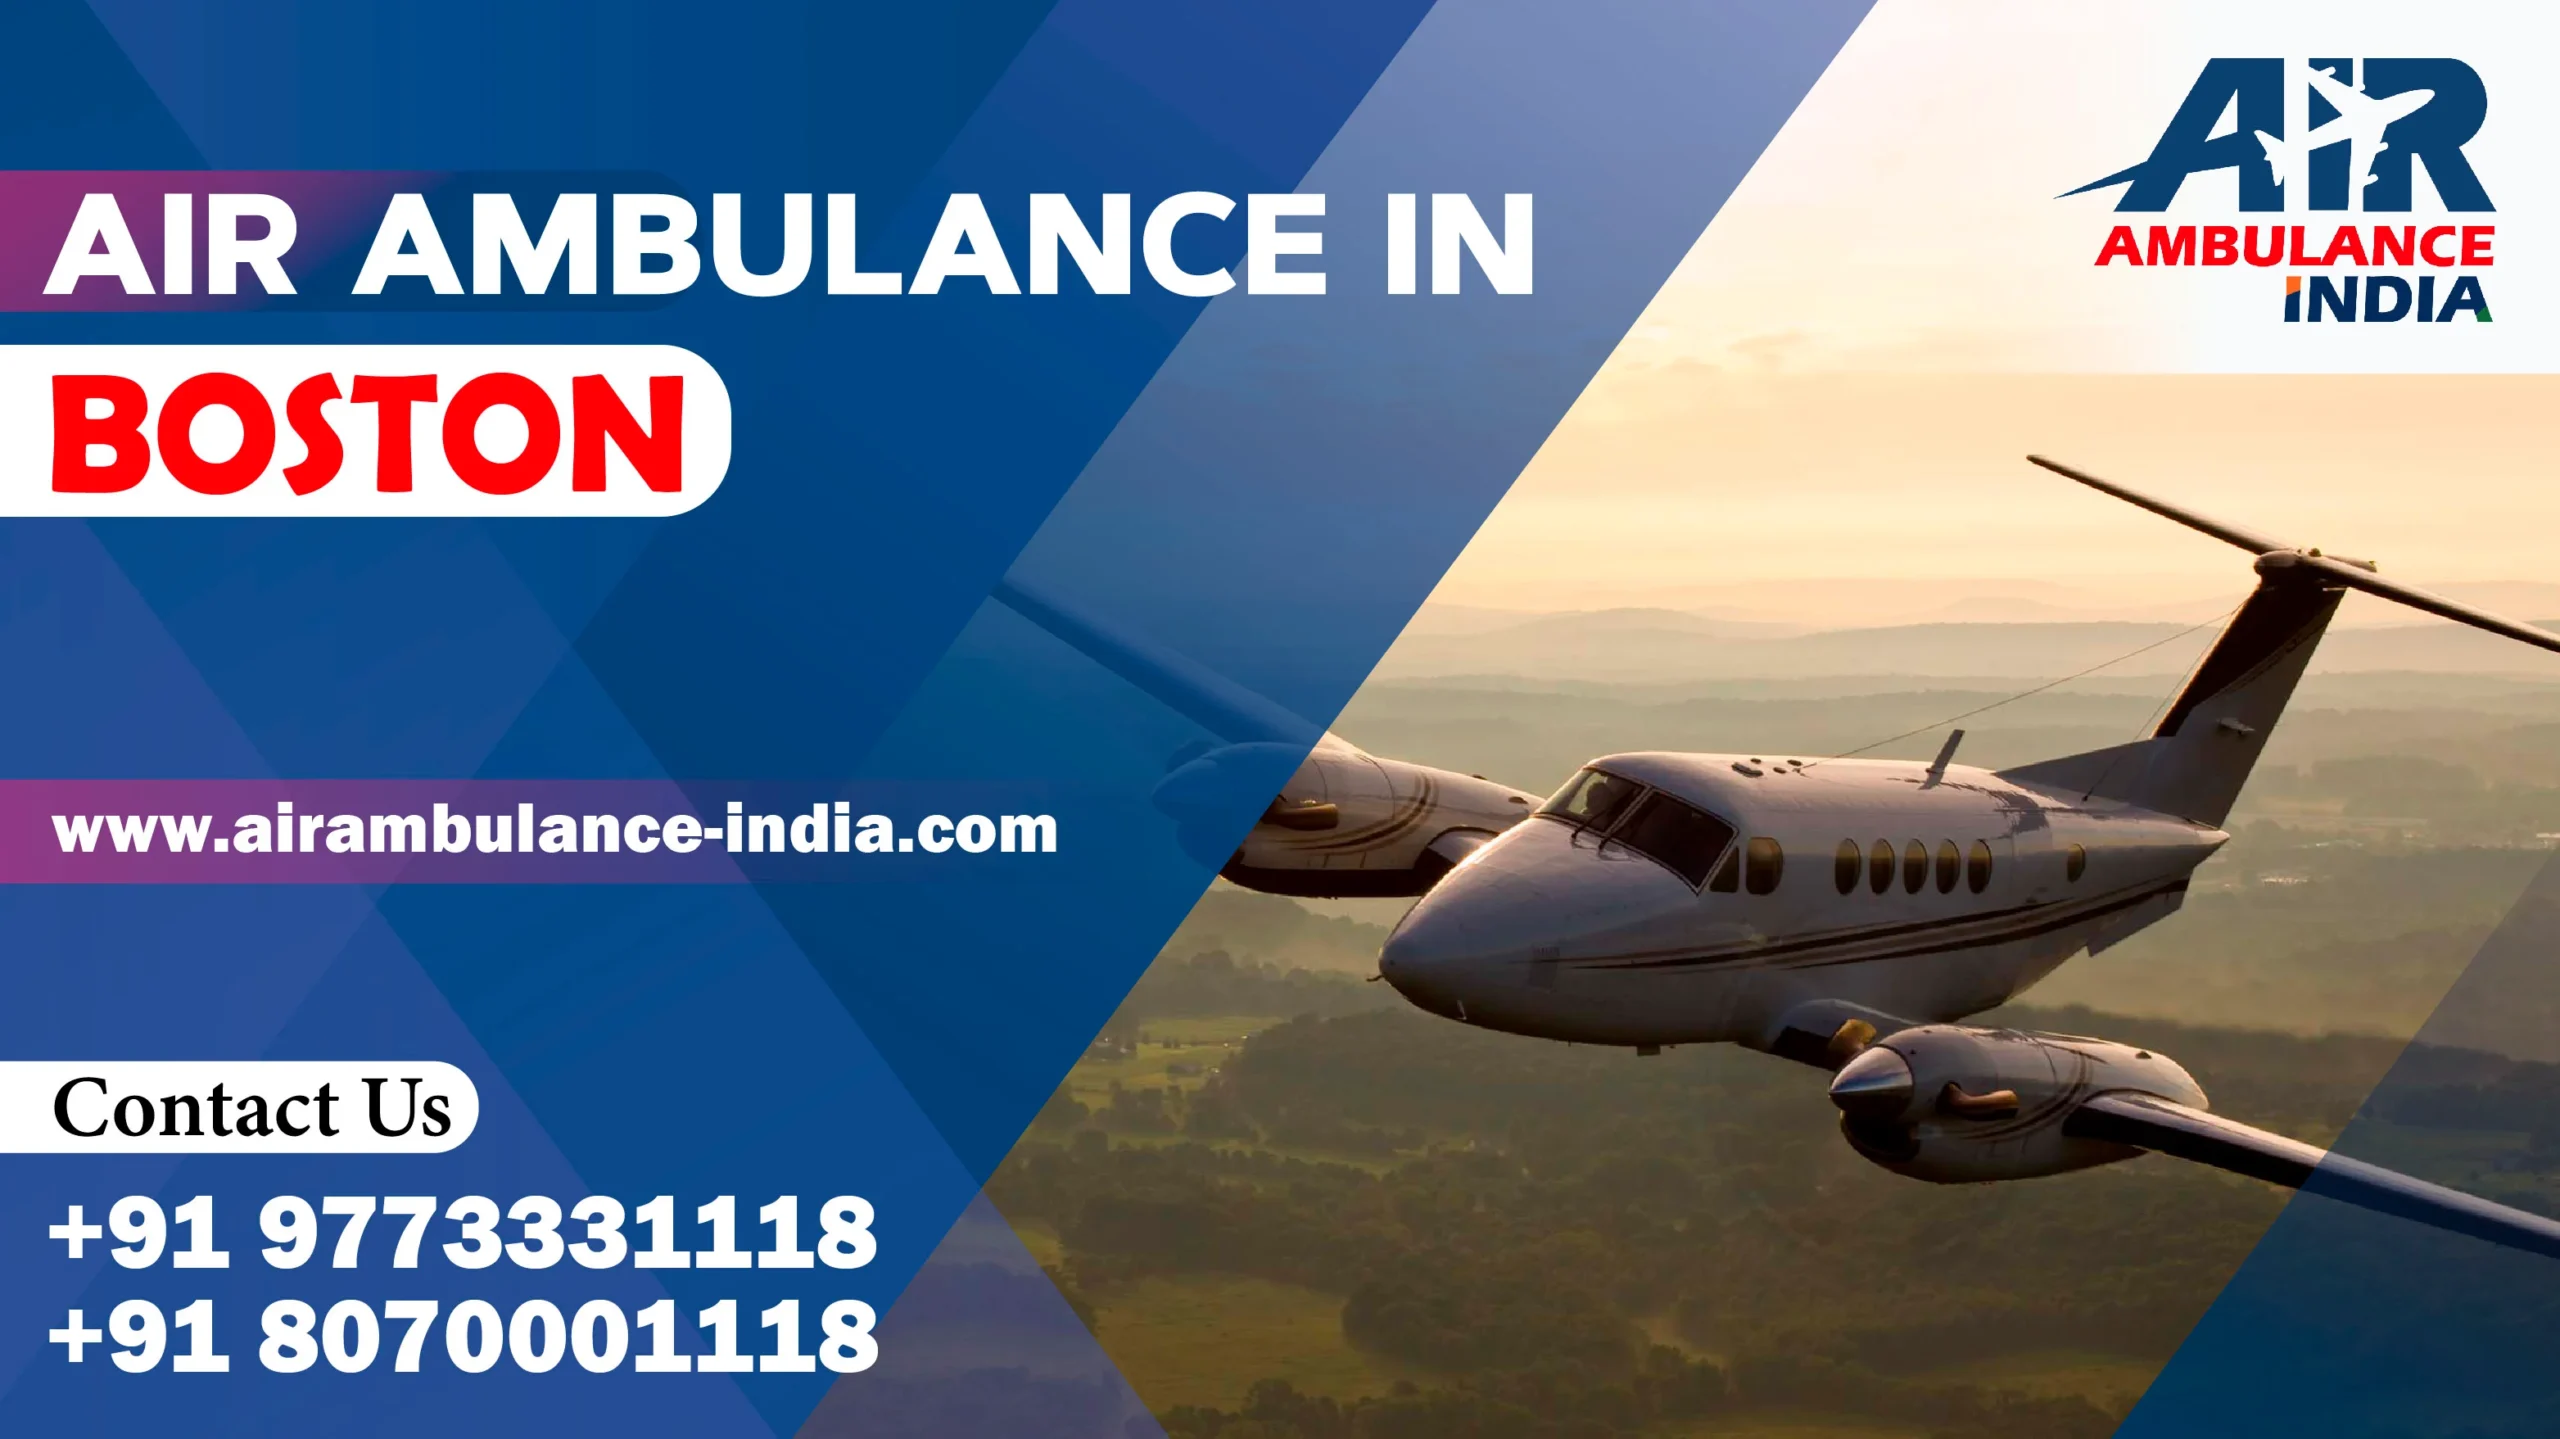 Air Ambulance Services in Boston